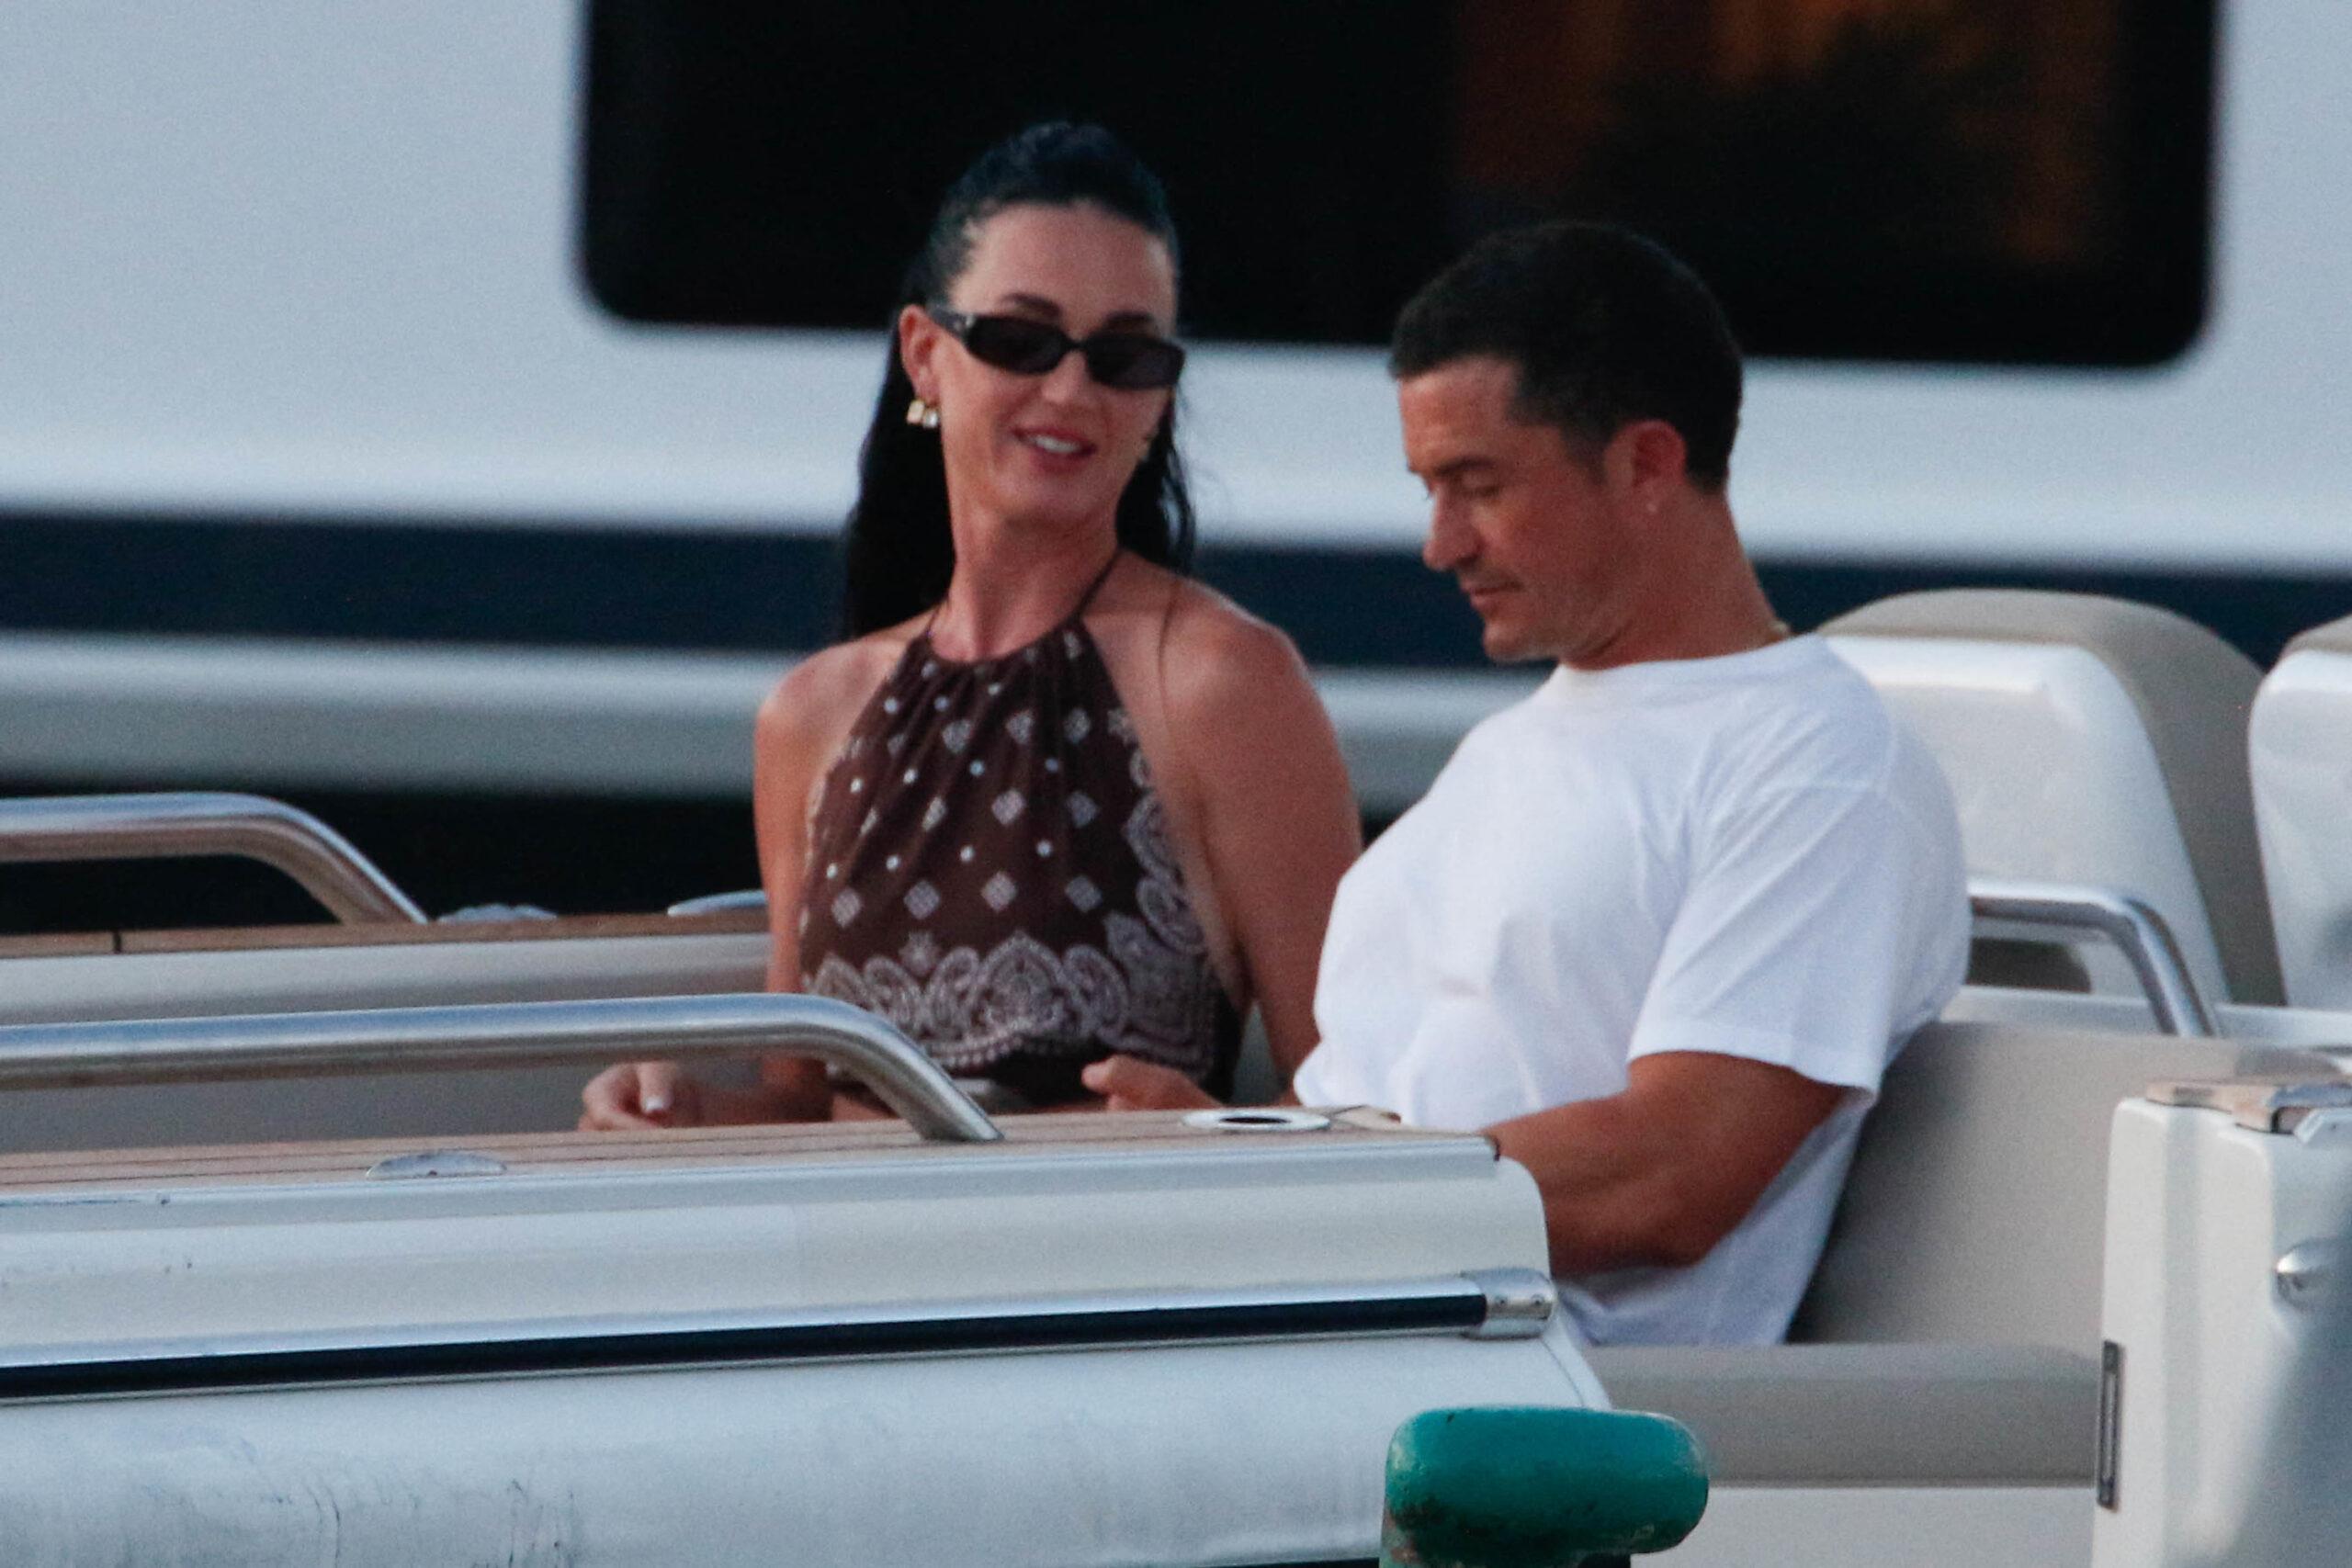 Katy Perry and Orlando Bloom aren seen out shhopping in Saint Tropez. 15 Jul 2024 Pictured: Katy Perry Orlando Bloom. Photo credit: Spread Pictures / MEGA TheMegaAgency.com +1 888 505 6342 (Mega Agency TagID: MEGA1166265_001.jpg) [Photo via Mega Agency]